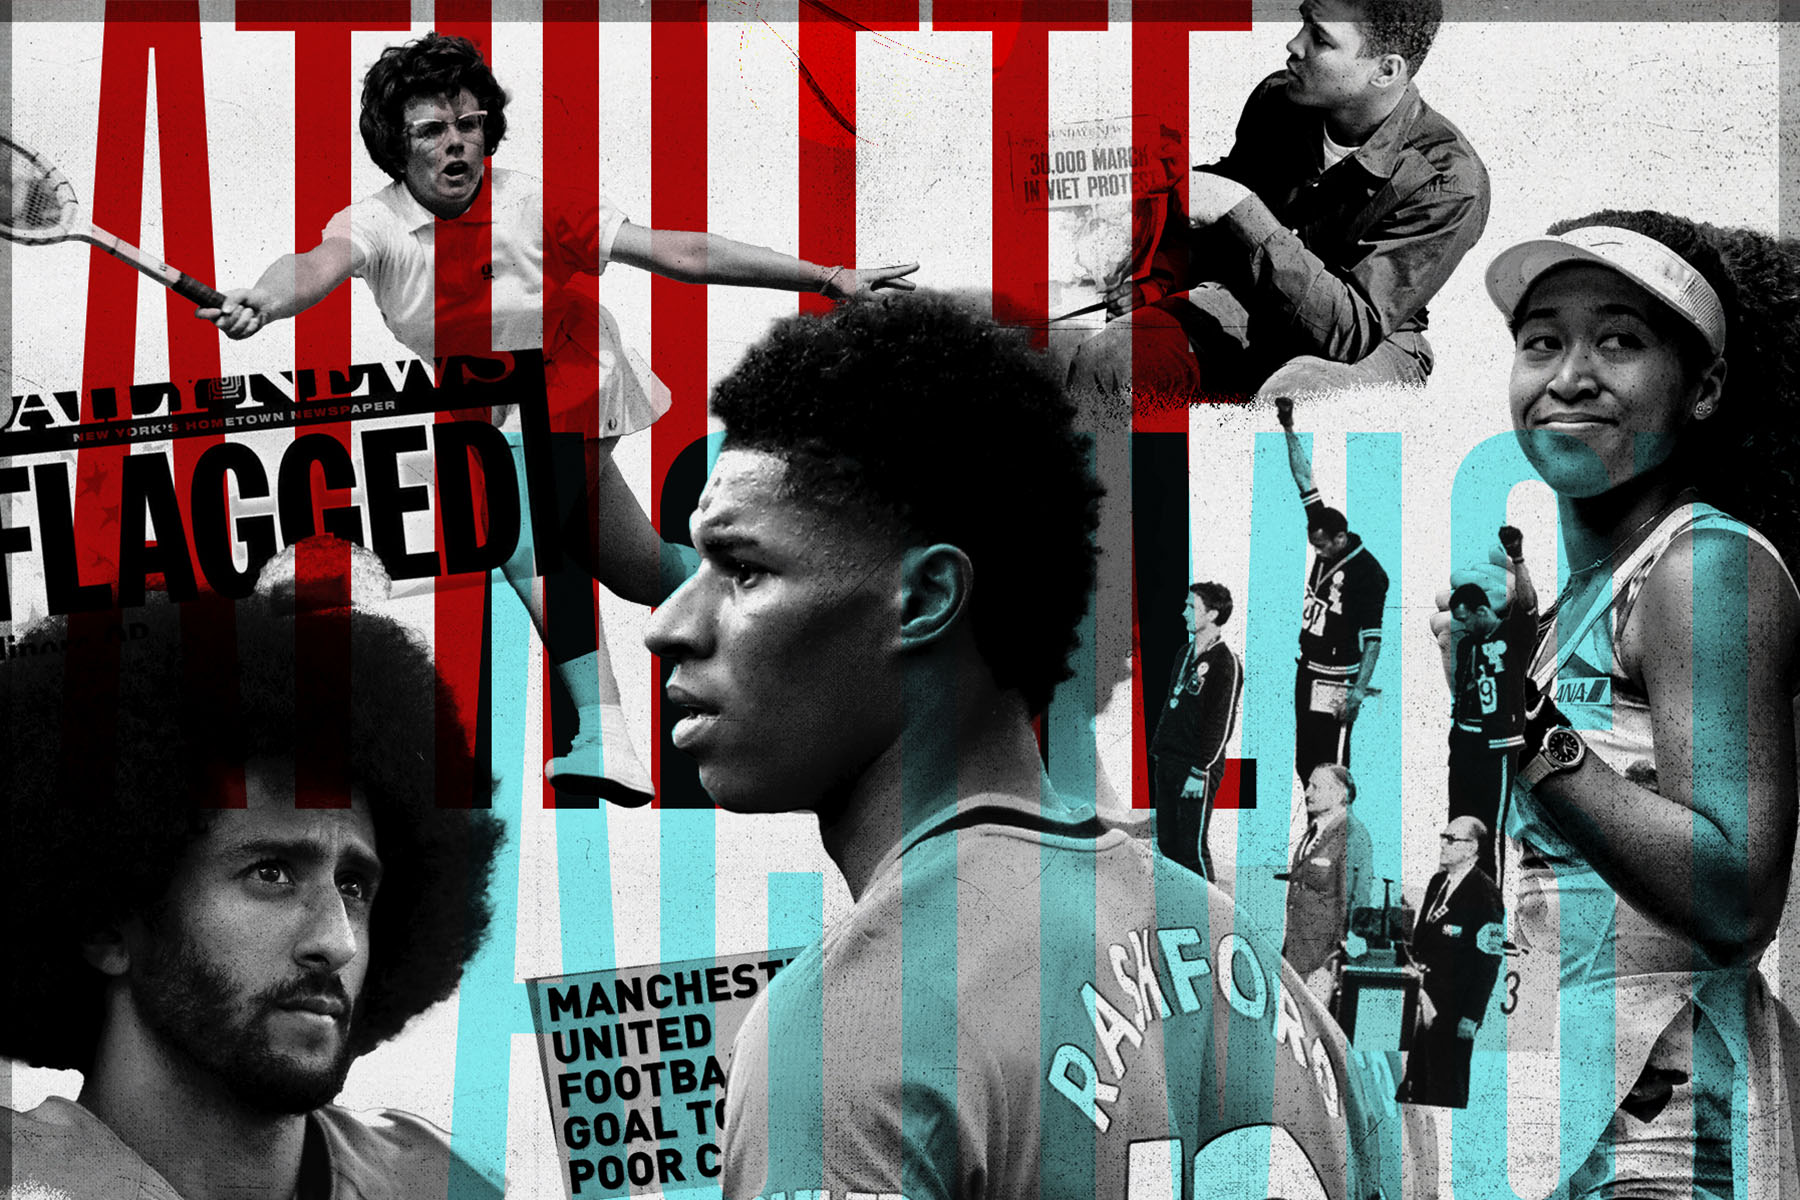 A photo collage of athlete-activists like Marcus Rashford, Colin Kaepernick, Billie Jean King, and Muhammad Ali, all in black and white with turquoise and red flourishes surrounding them.